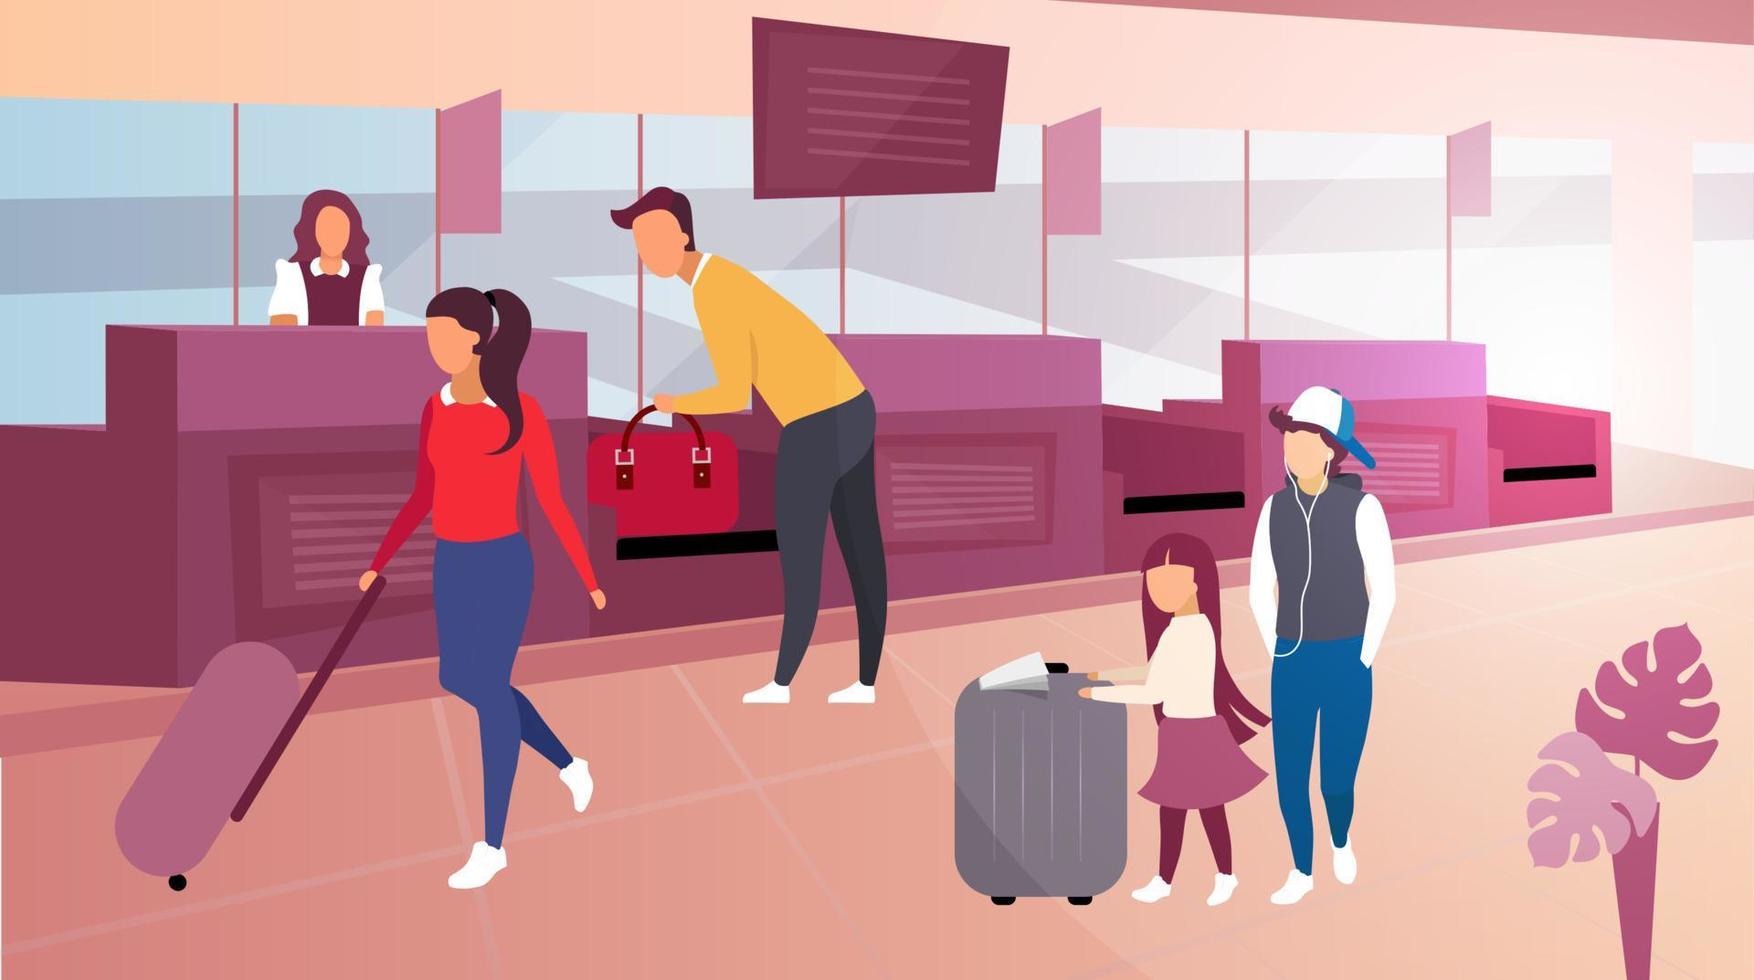 Luggage check in airport flat vector illustration. Cartoon tourists carrying suitcases. Male passenger, traveler submitting bag for customs officer control. Father taking luggage from conveyor belt